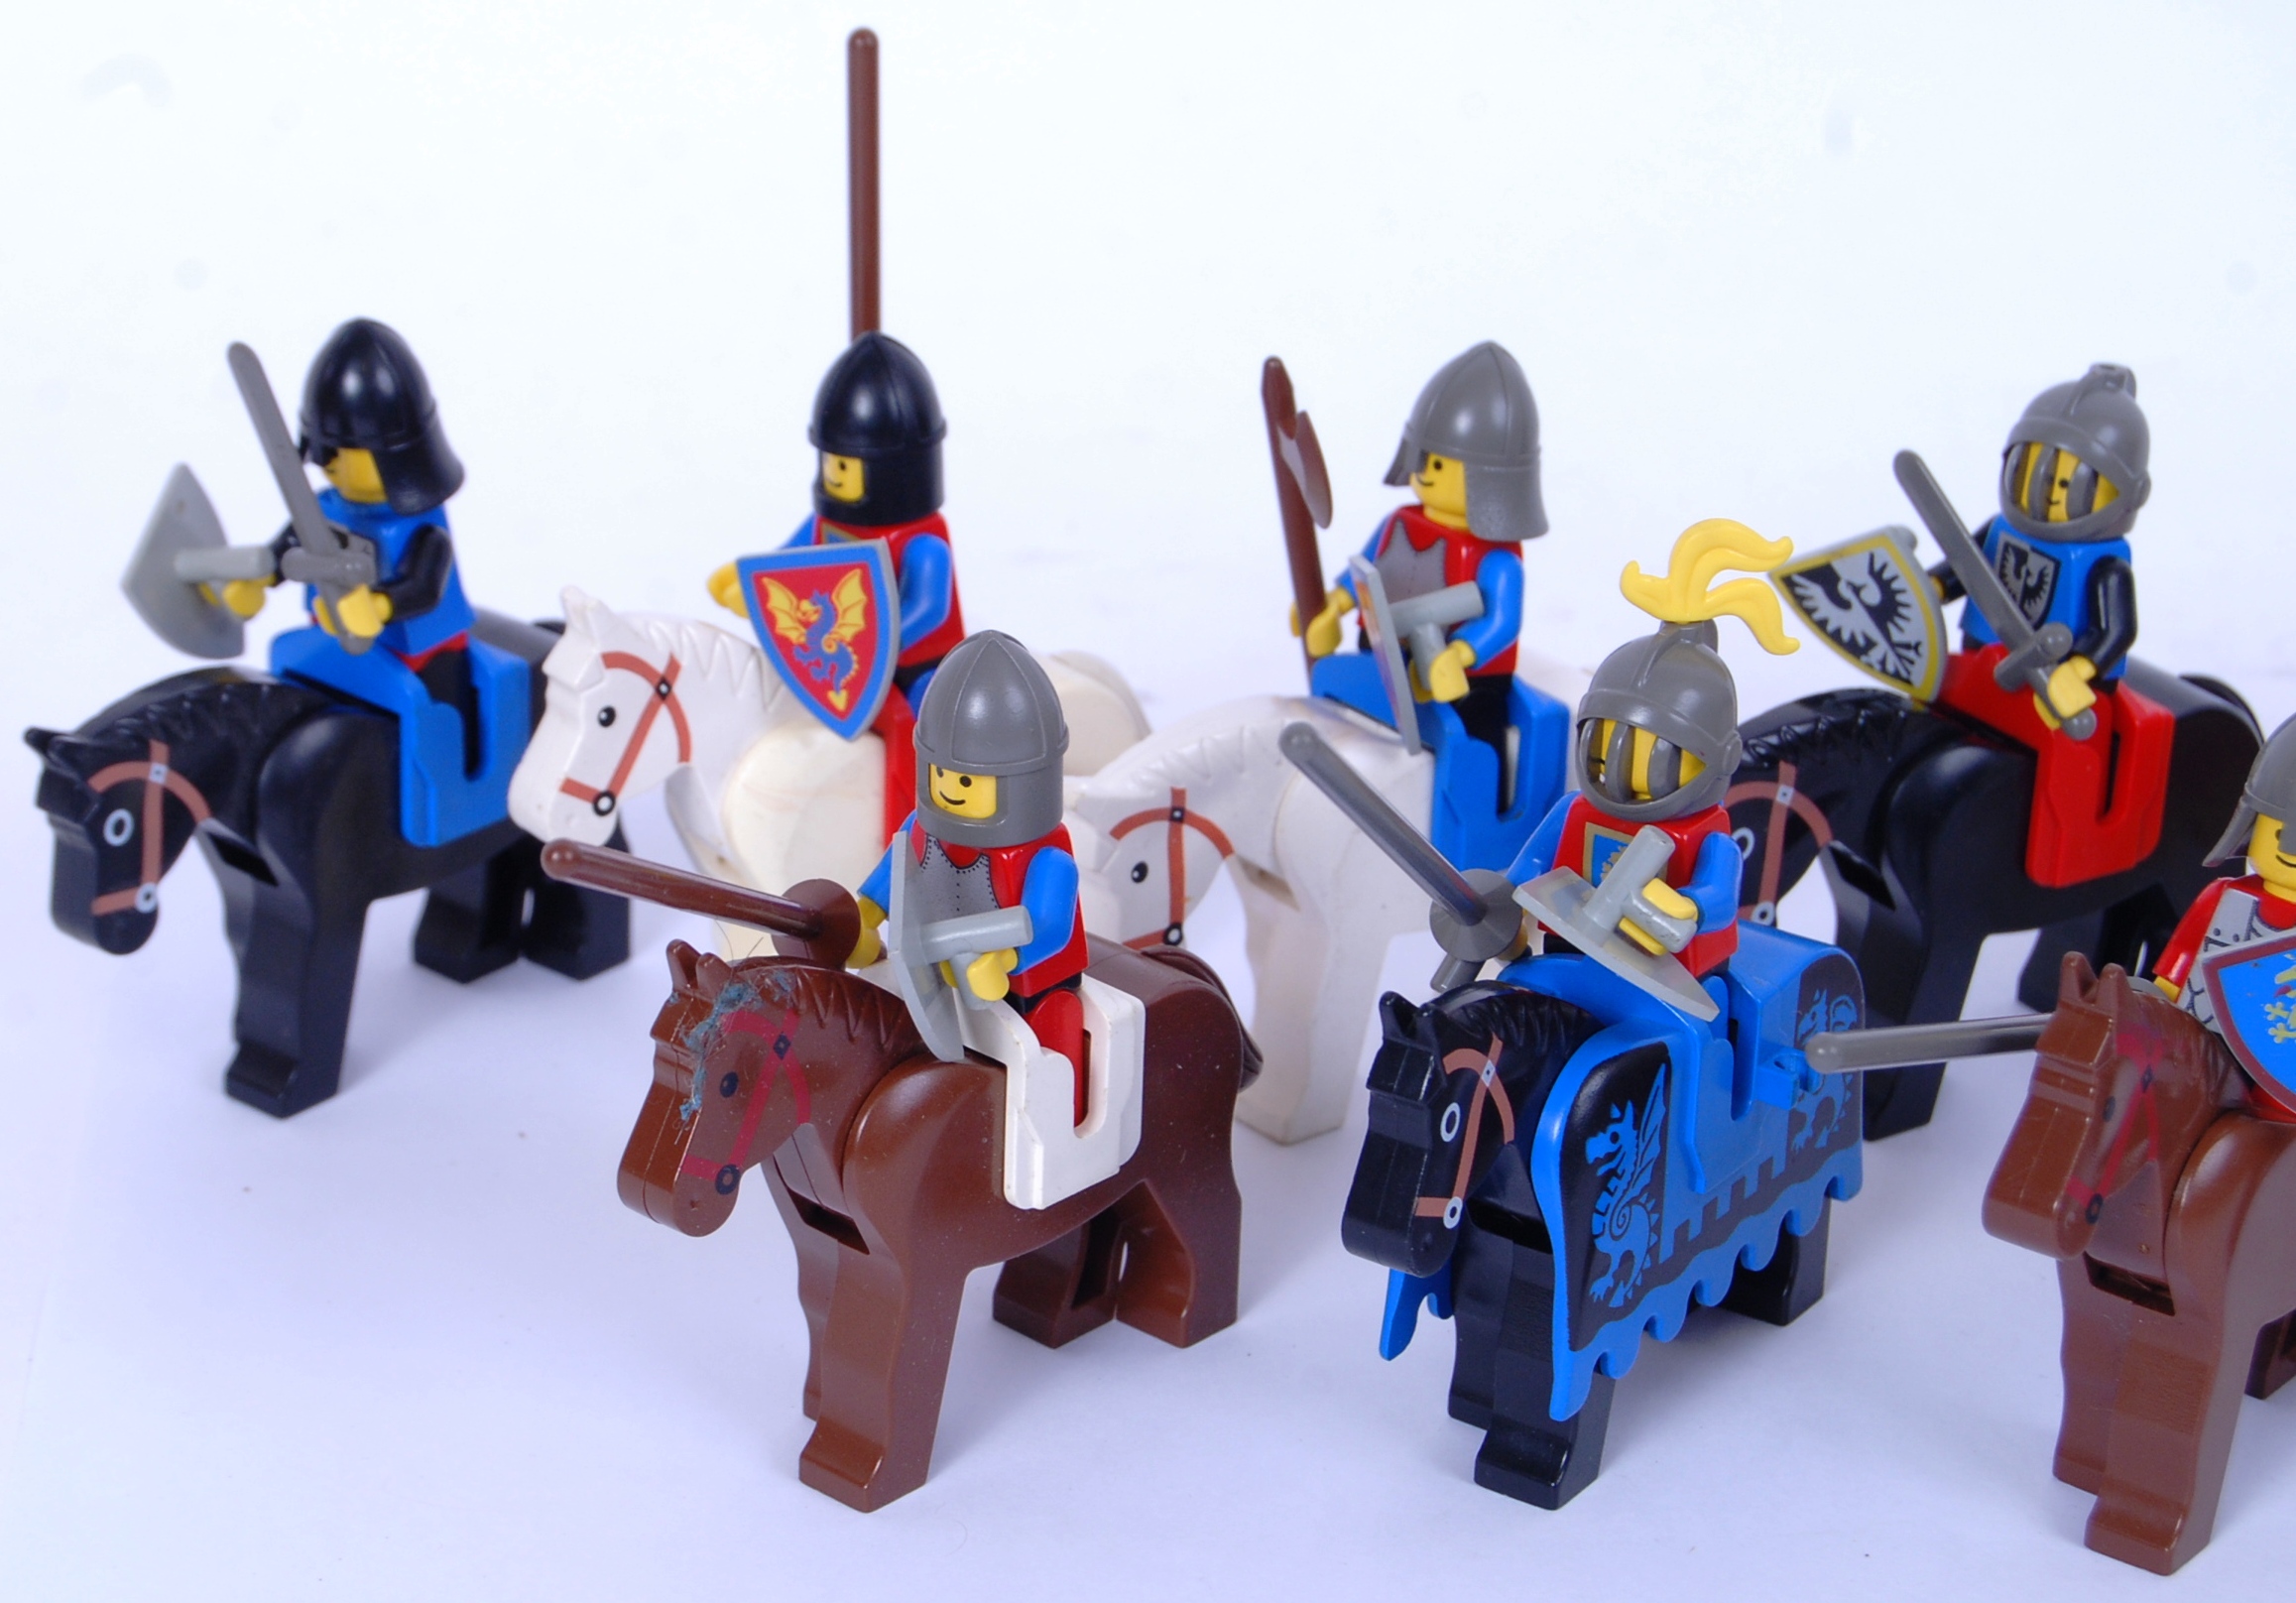 VINTAGE MINIFIGURES: A collection of 12x vintage 1980's Lego minifigures - all knights on horseback, - Image 2 of 4